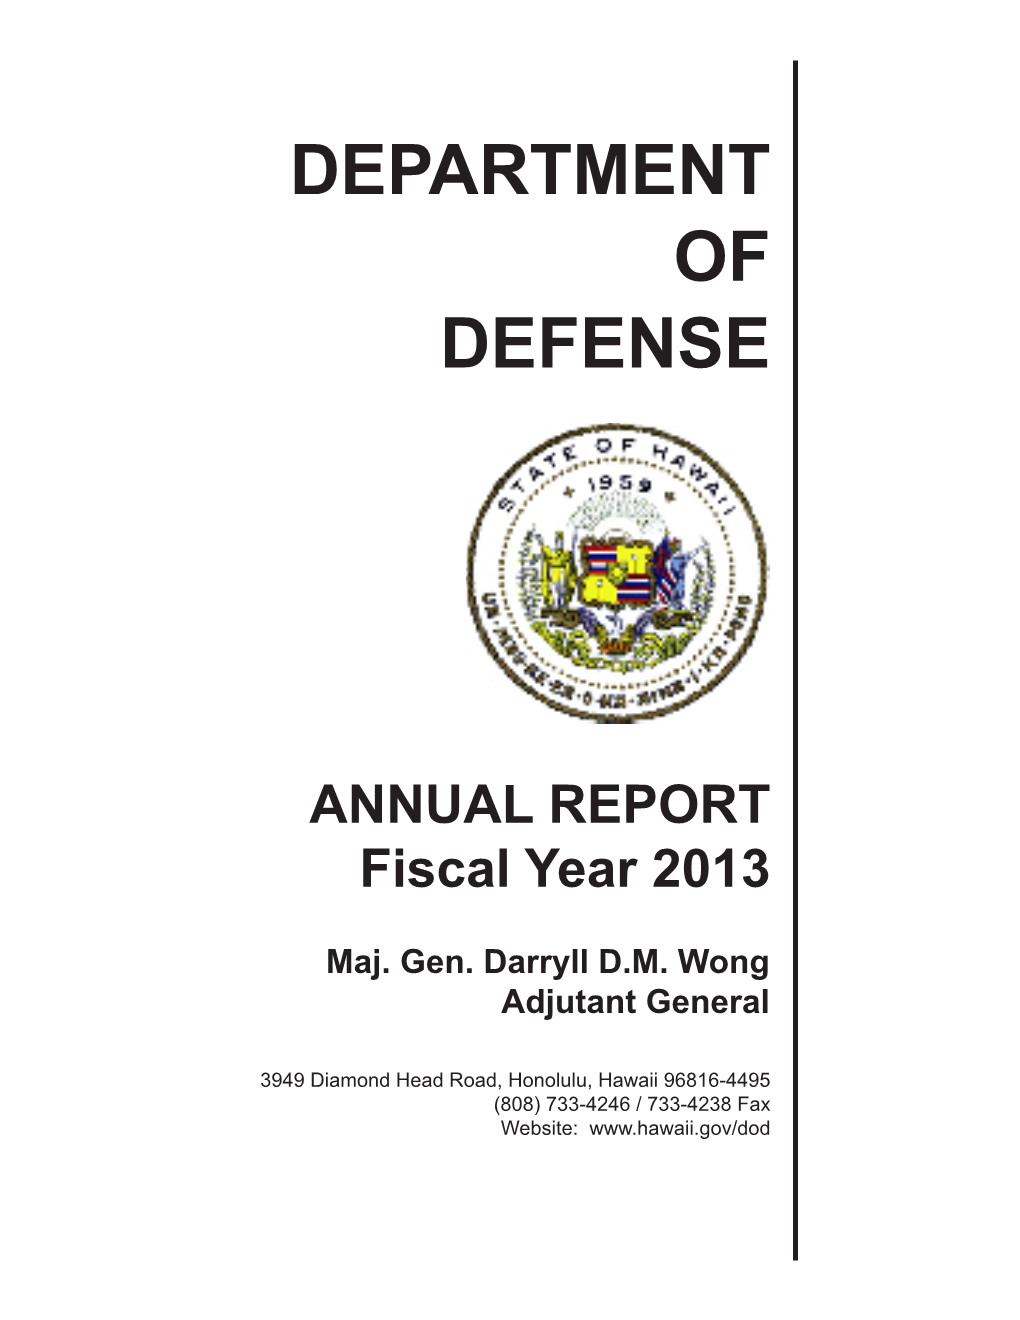 ANNUAL REPORT Fiscal Year 2013